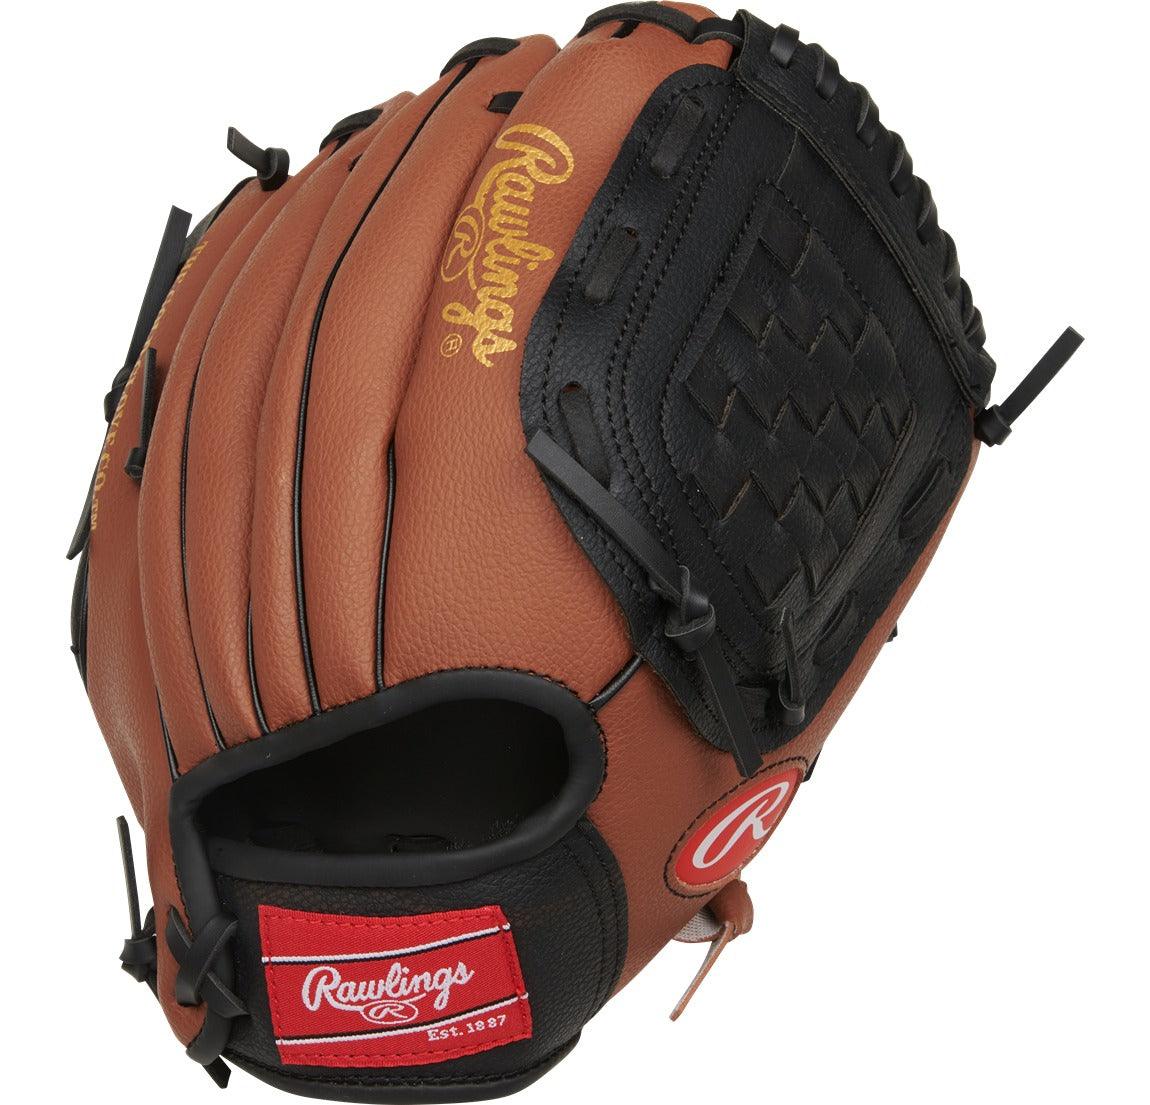 Players 10.5" Baseball Glove - Youth - Sports Excellence